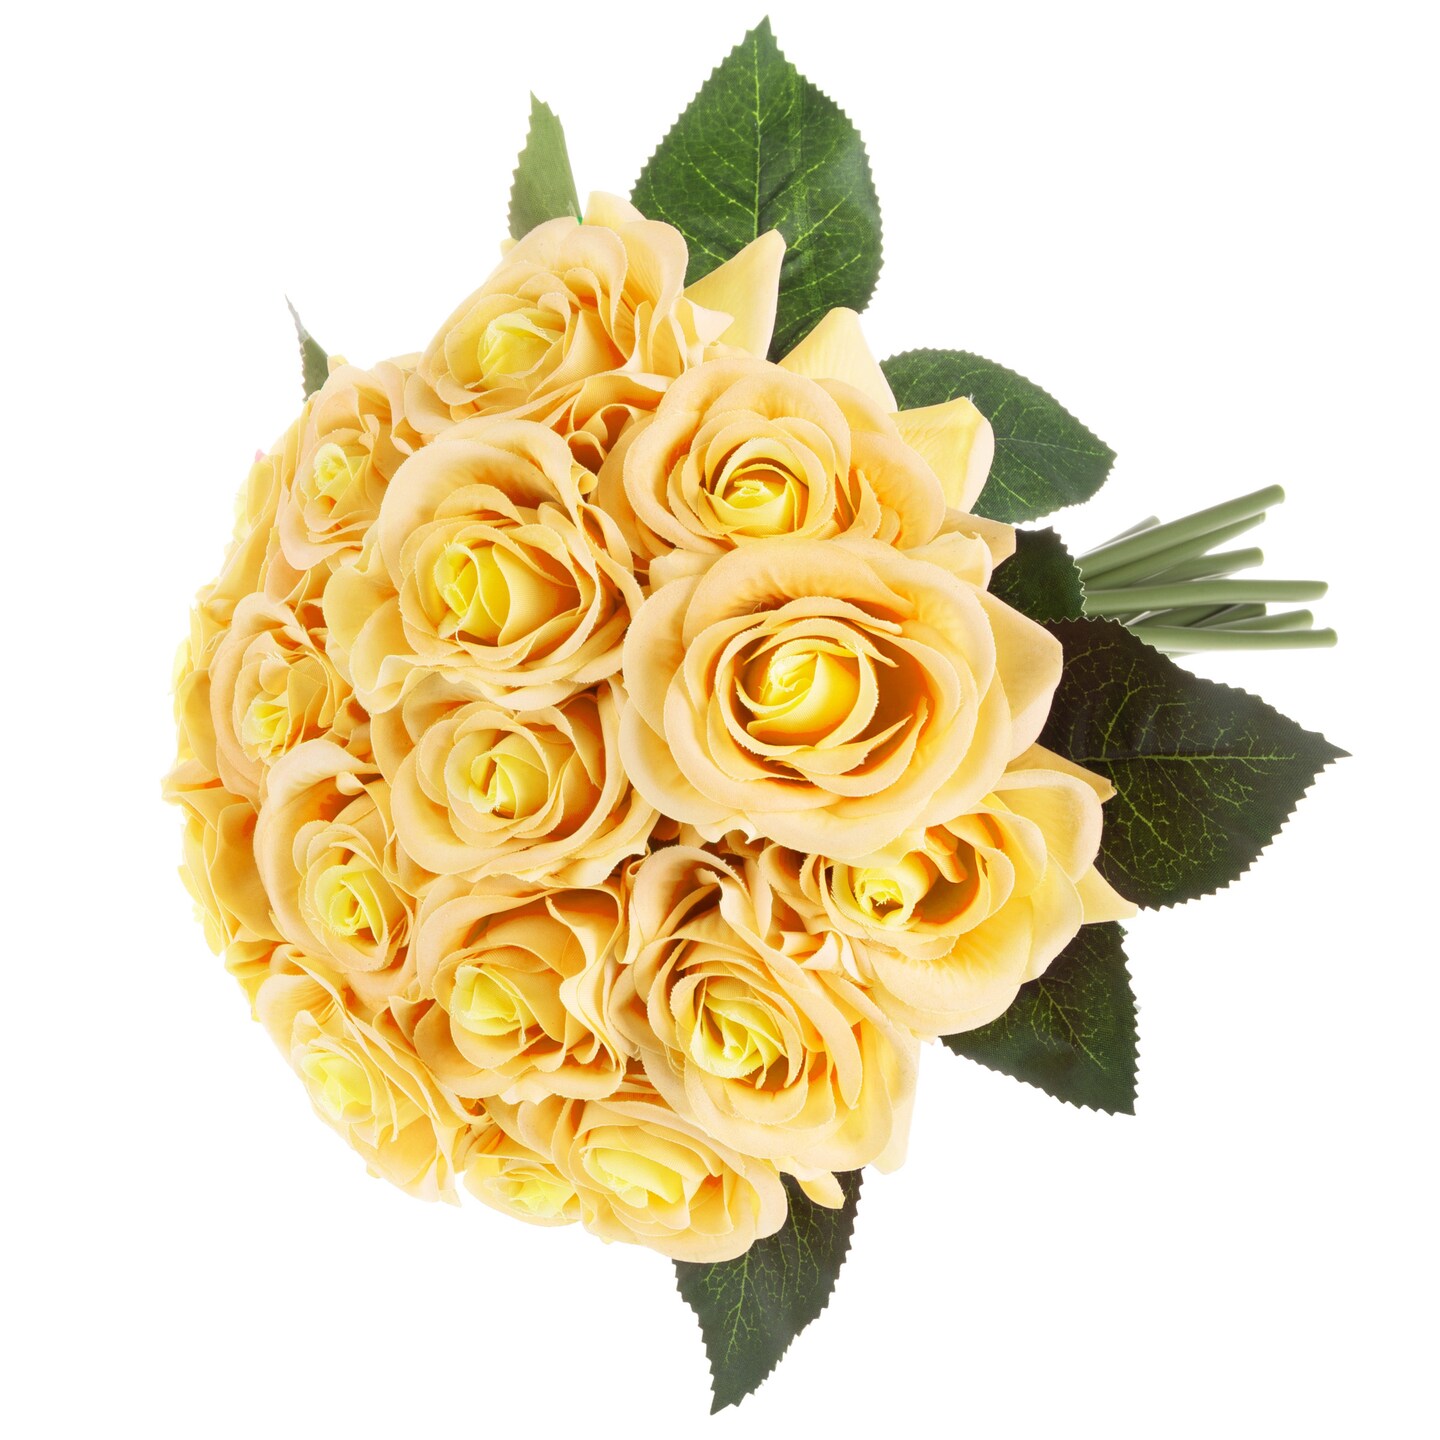 Pure Garden Artificial Open Yellow Rose Bundles 18 Pc Real Touch Fake Flowers 11.5 Inch